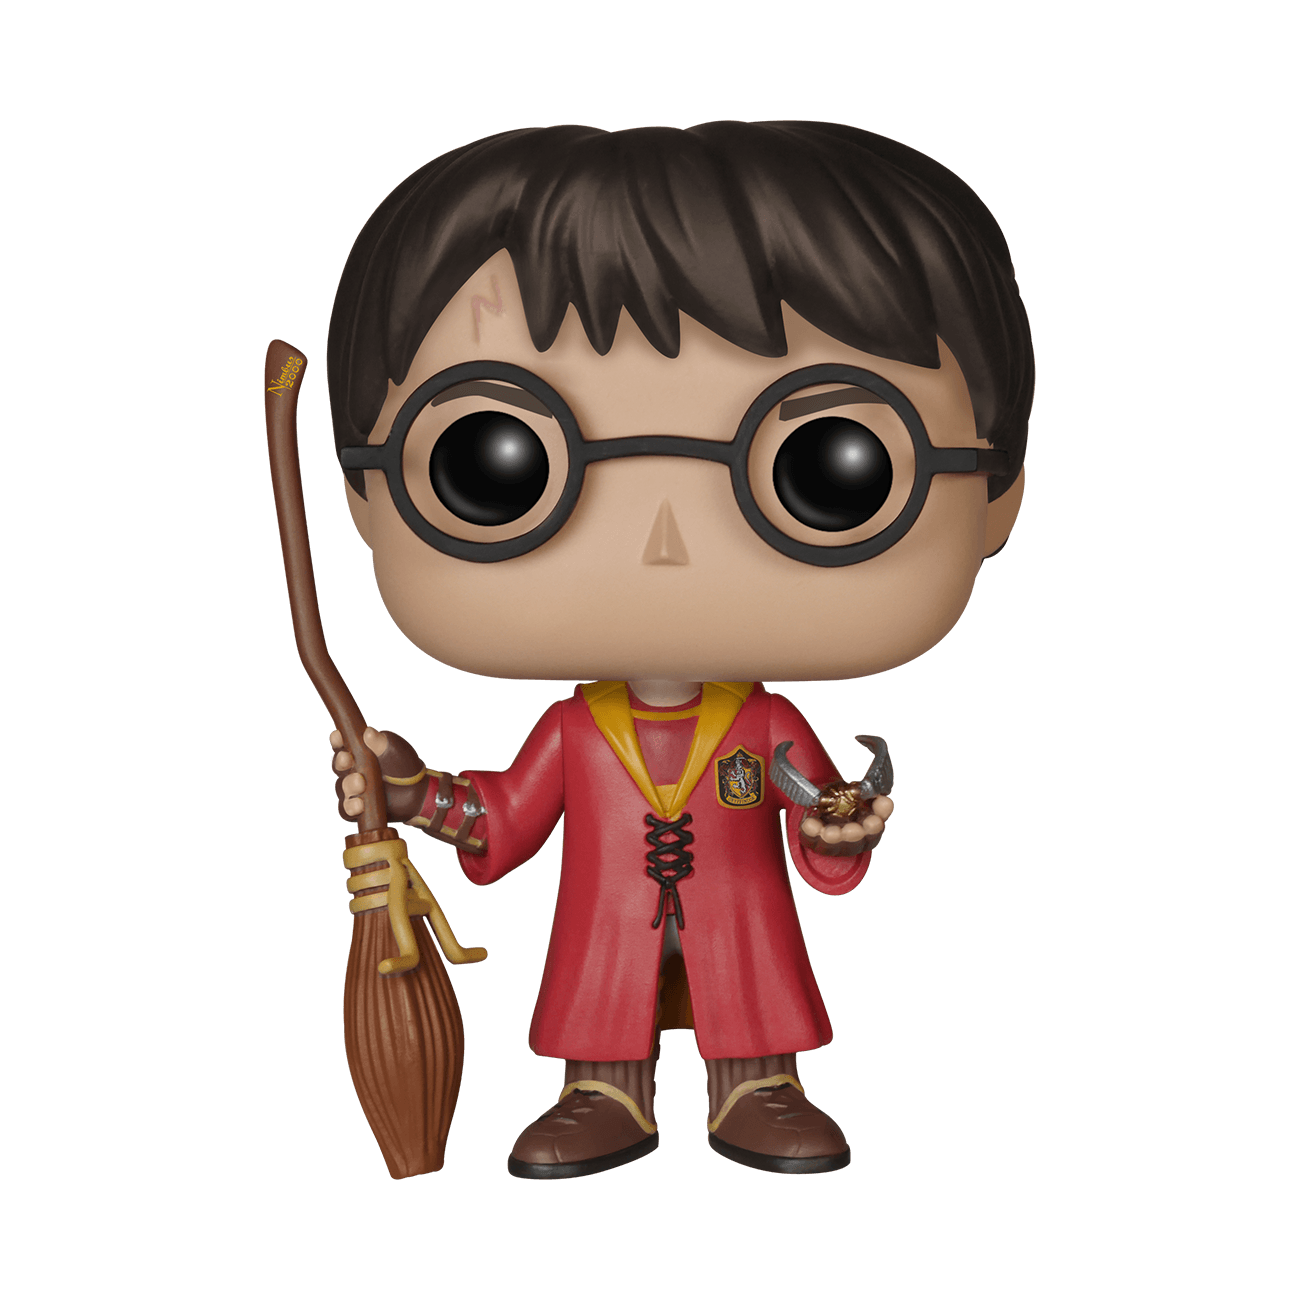 Funko POP Harry Potter - Quidditch Harry - BumbleToys - 18+, 5-7 Years, Boys, Fashion Dolls & Accessories, Funko, Harry Potter, Pre-Order